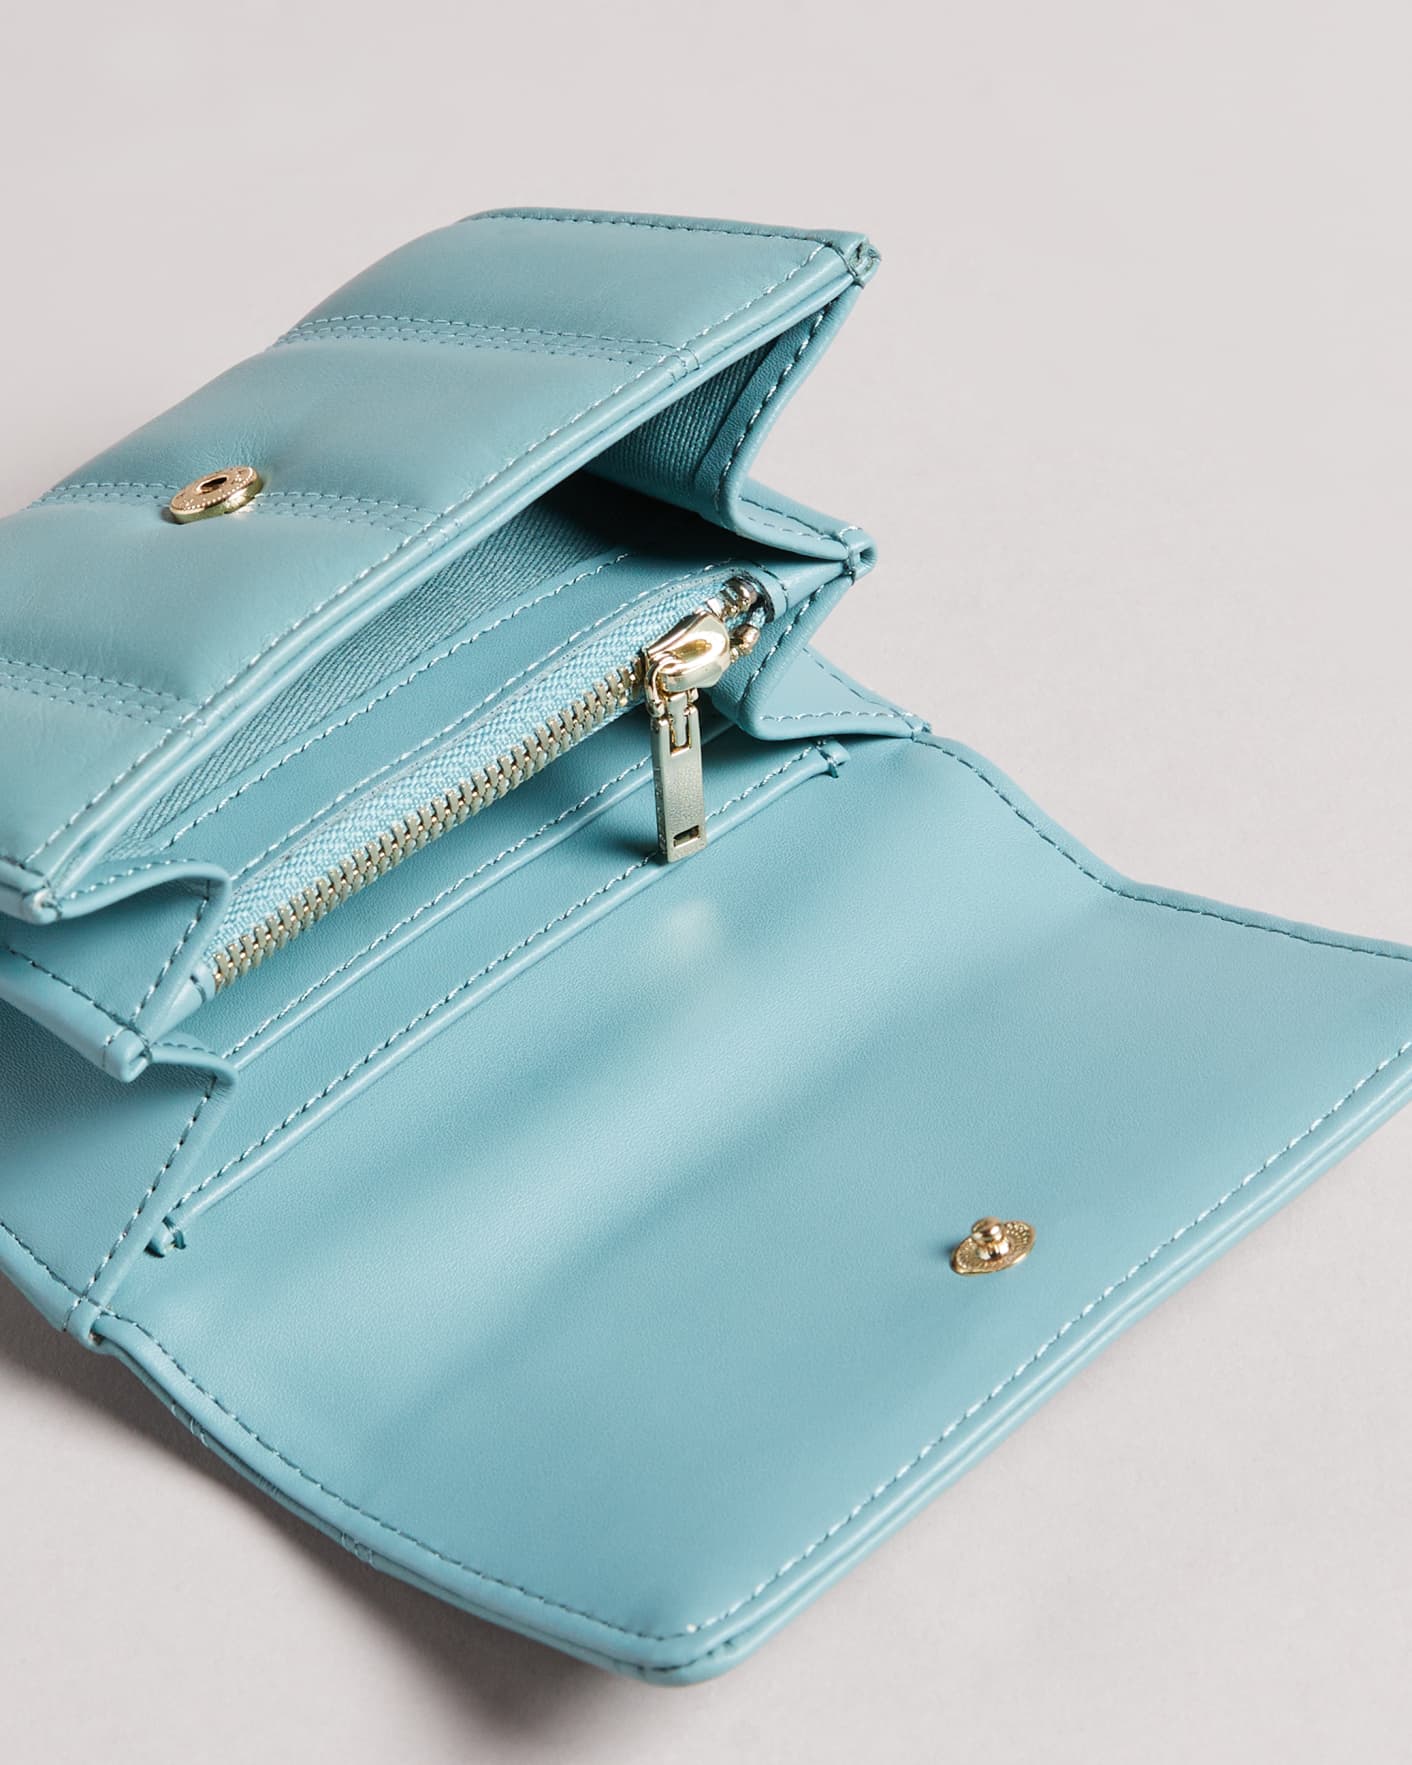 Teal-Blue Leather Puffer Small Matinee Purse Ted Baker